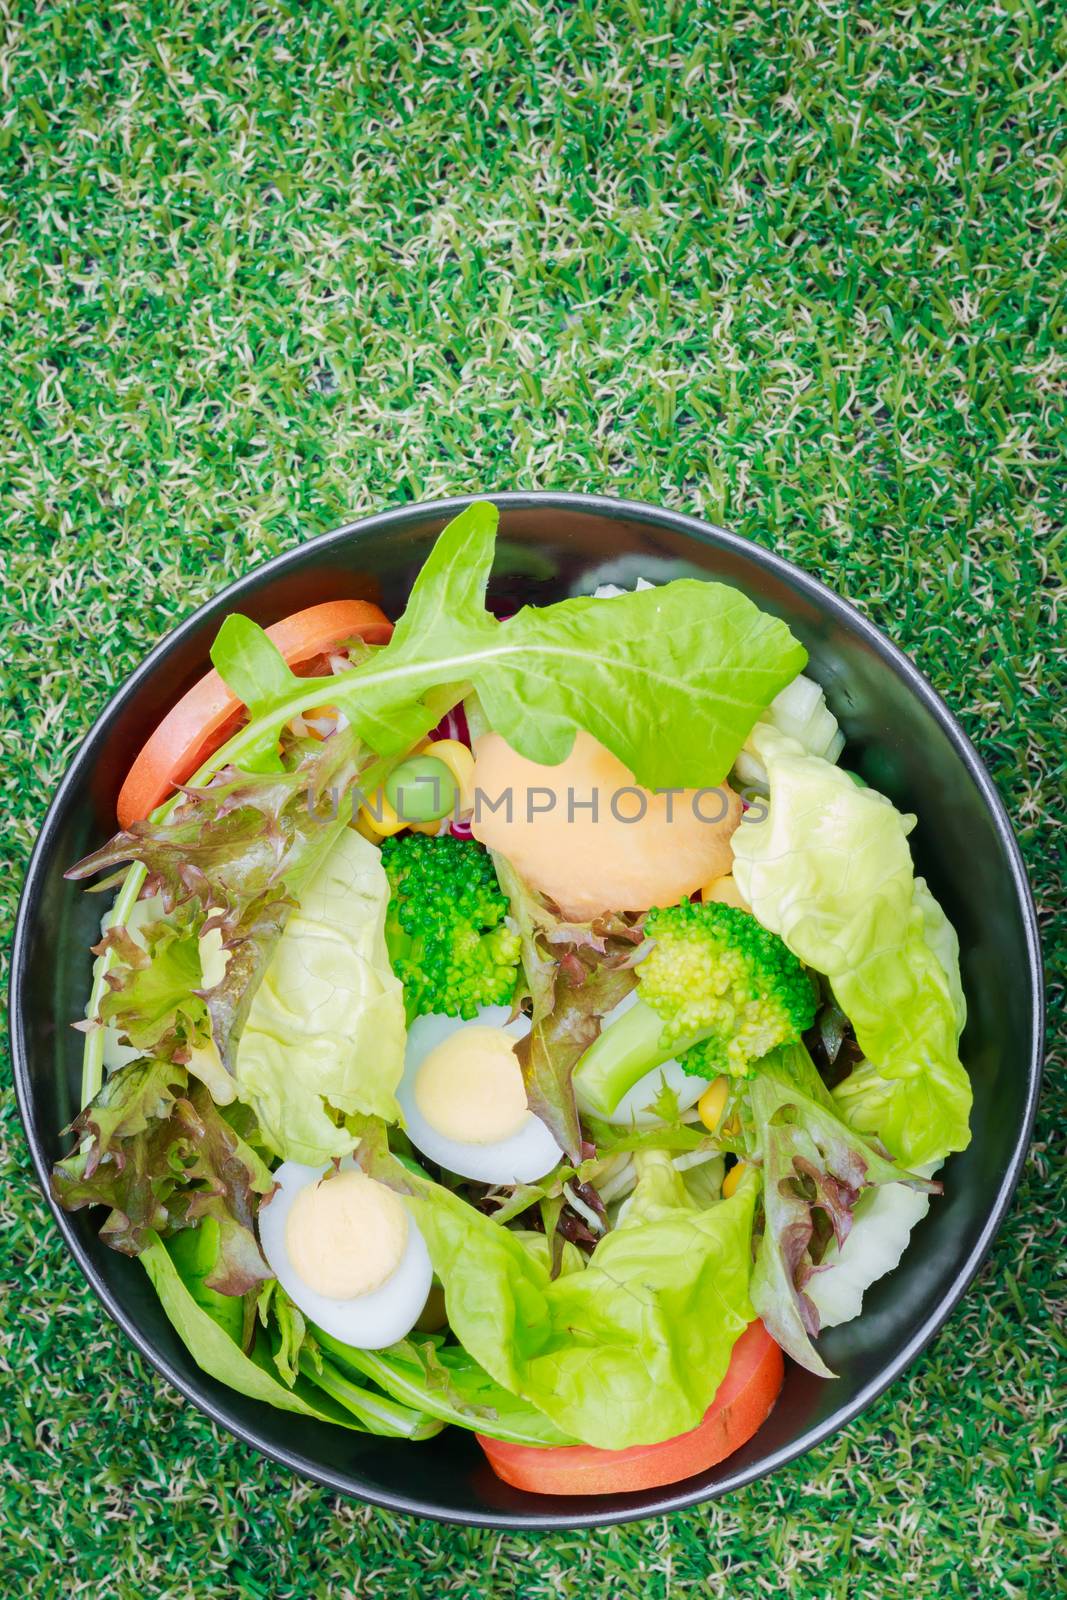 Mixed salad with quail eggs on green grass